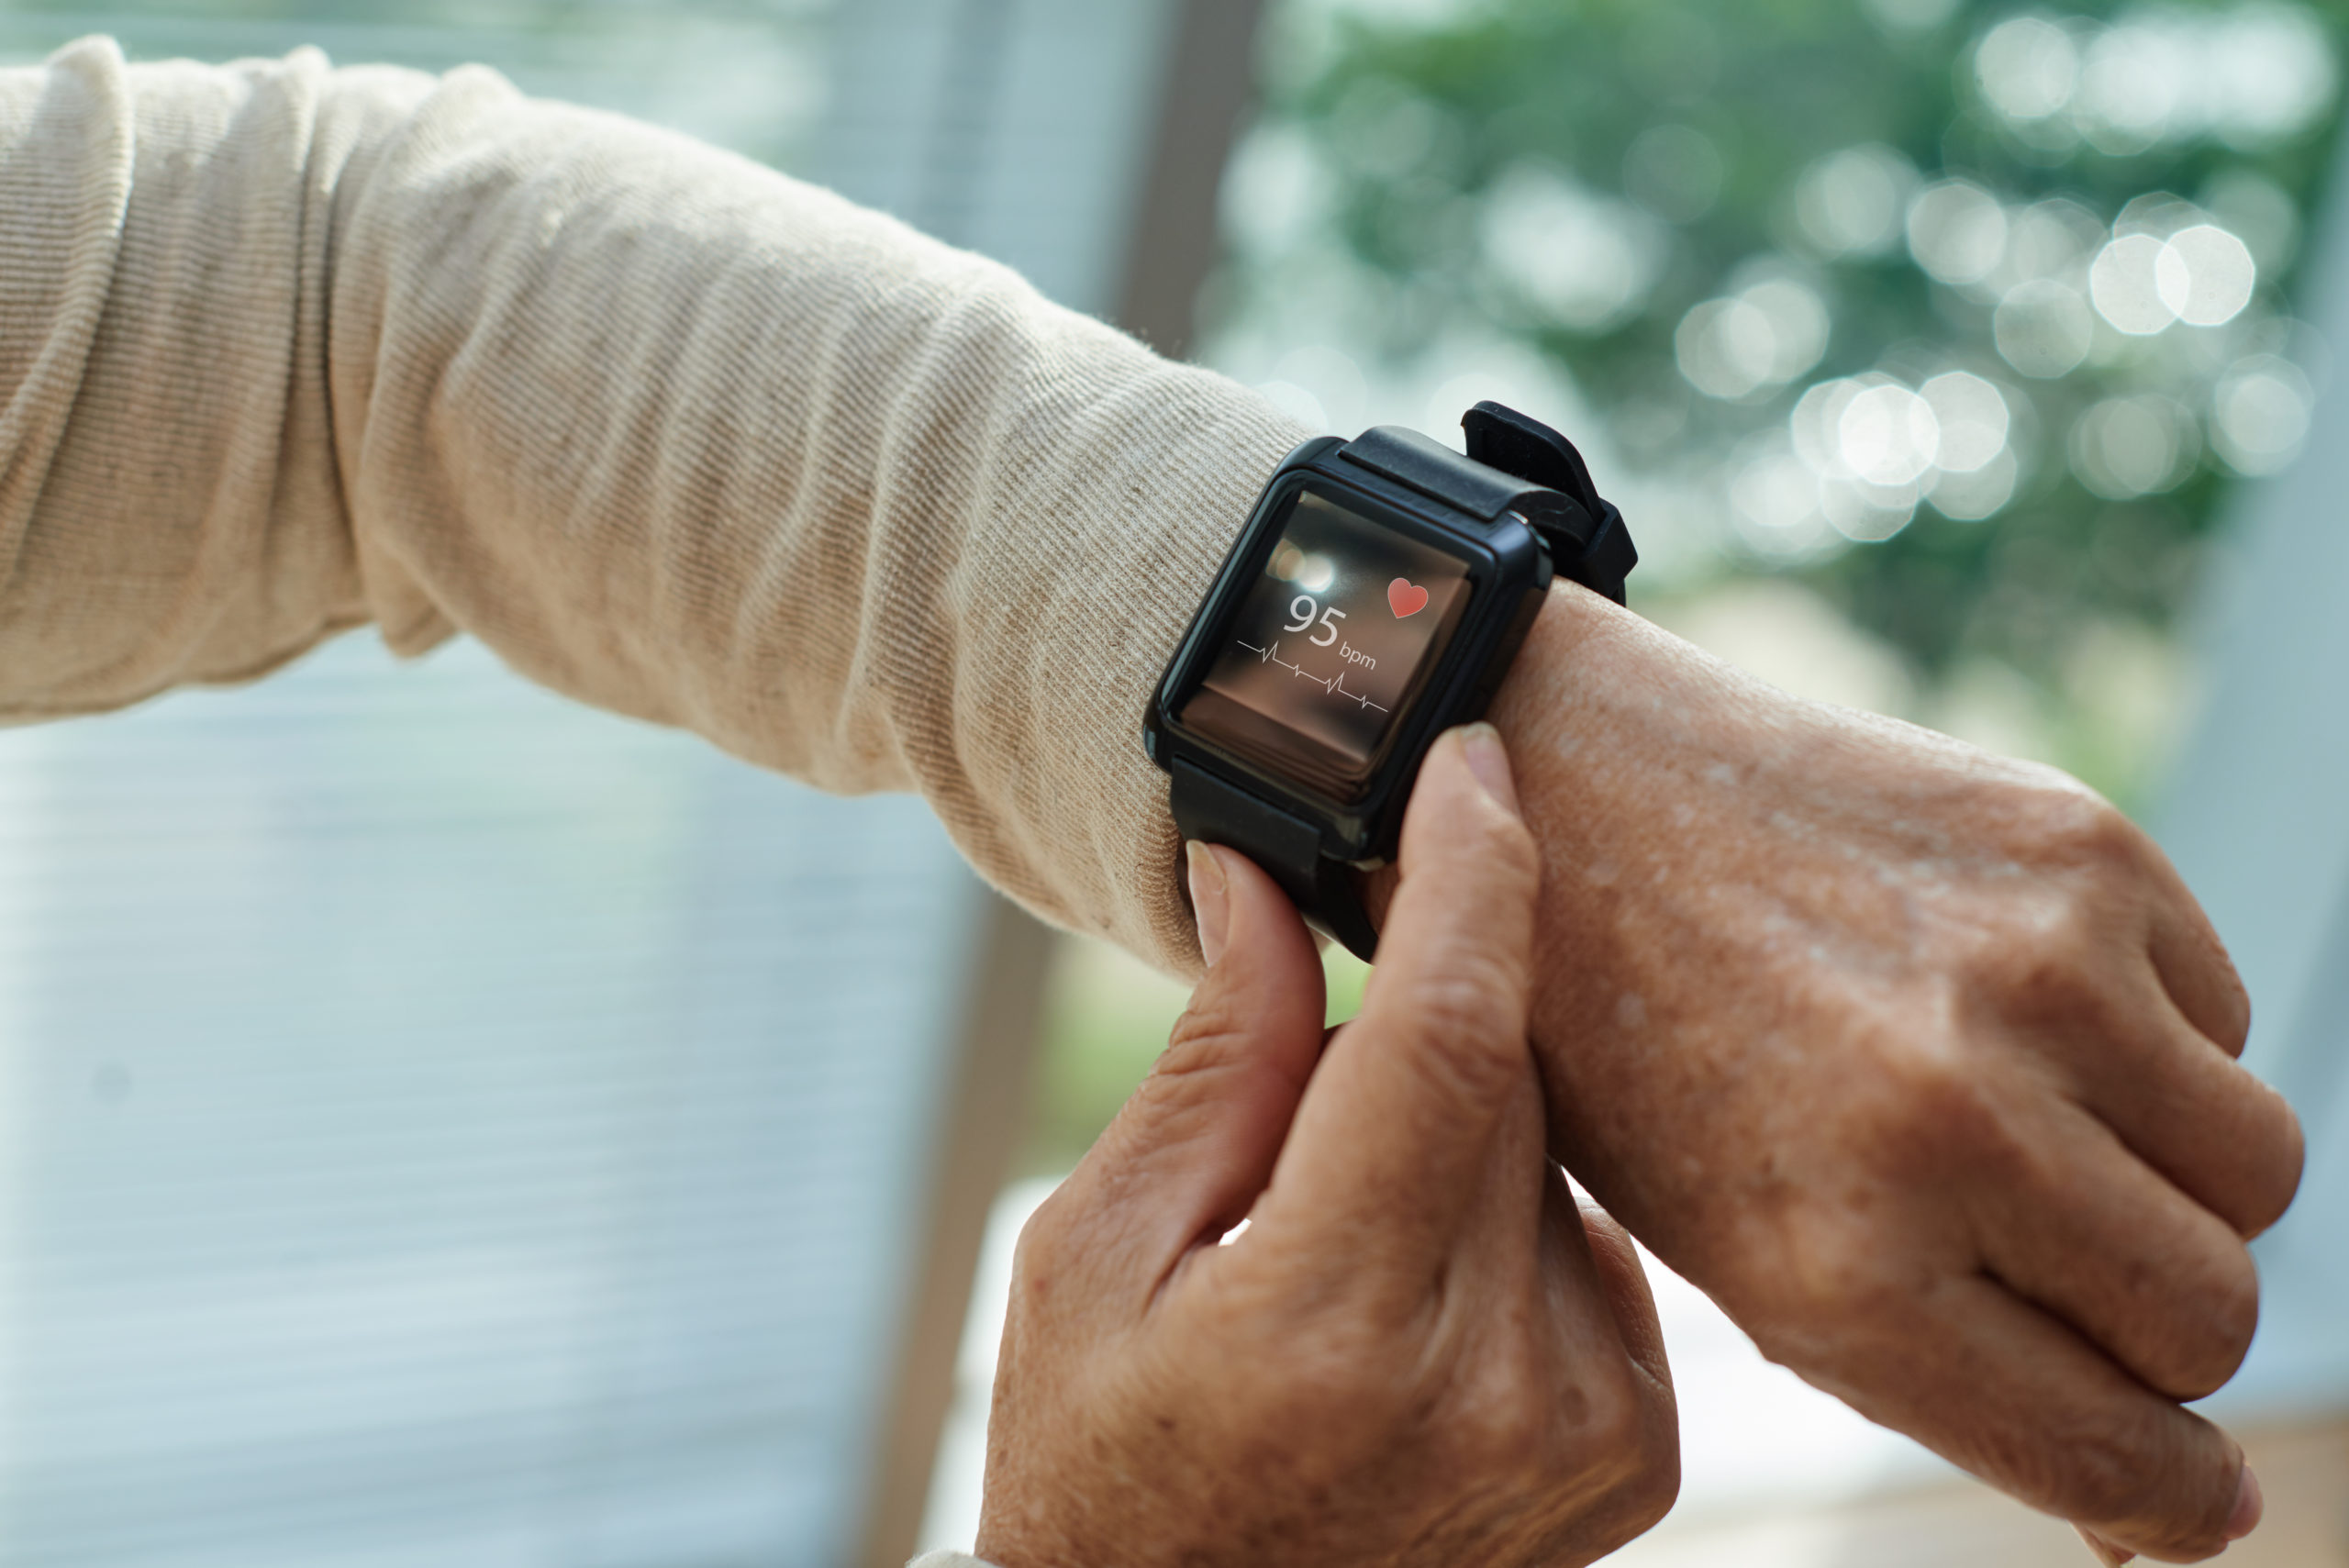  Senior woman checks her heart rate on a smartwatch. 